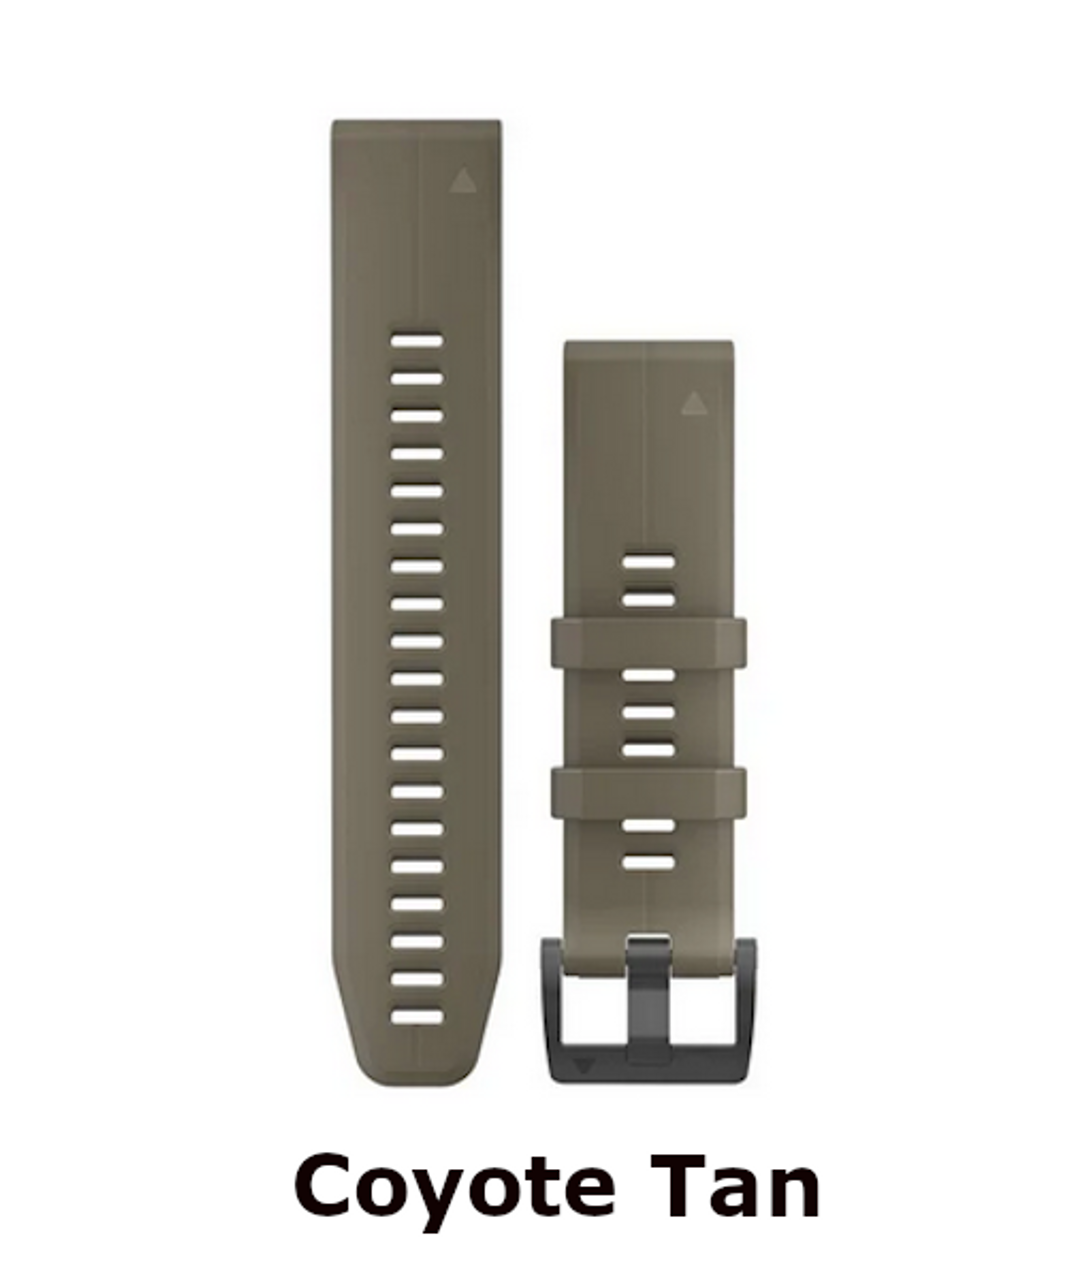 quickfit 22 coyote tan watchband - at okie dog supply